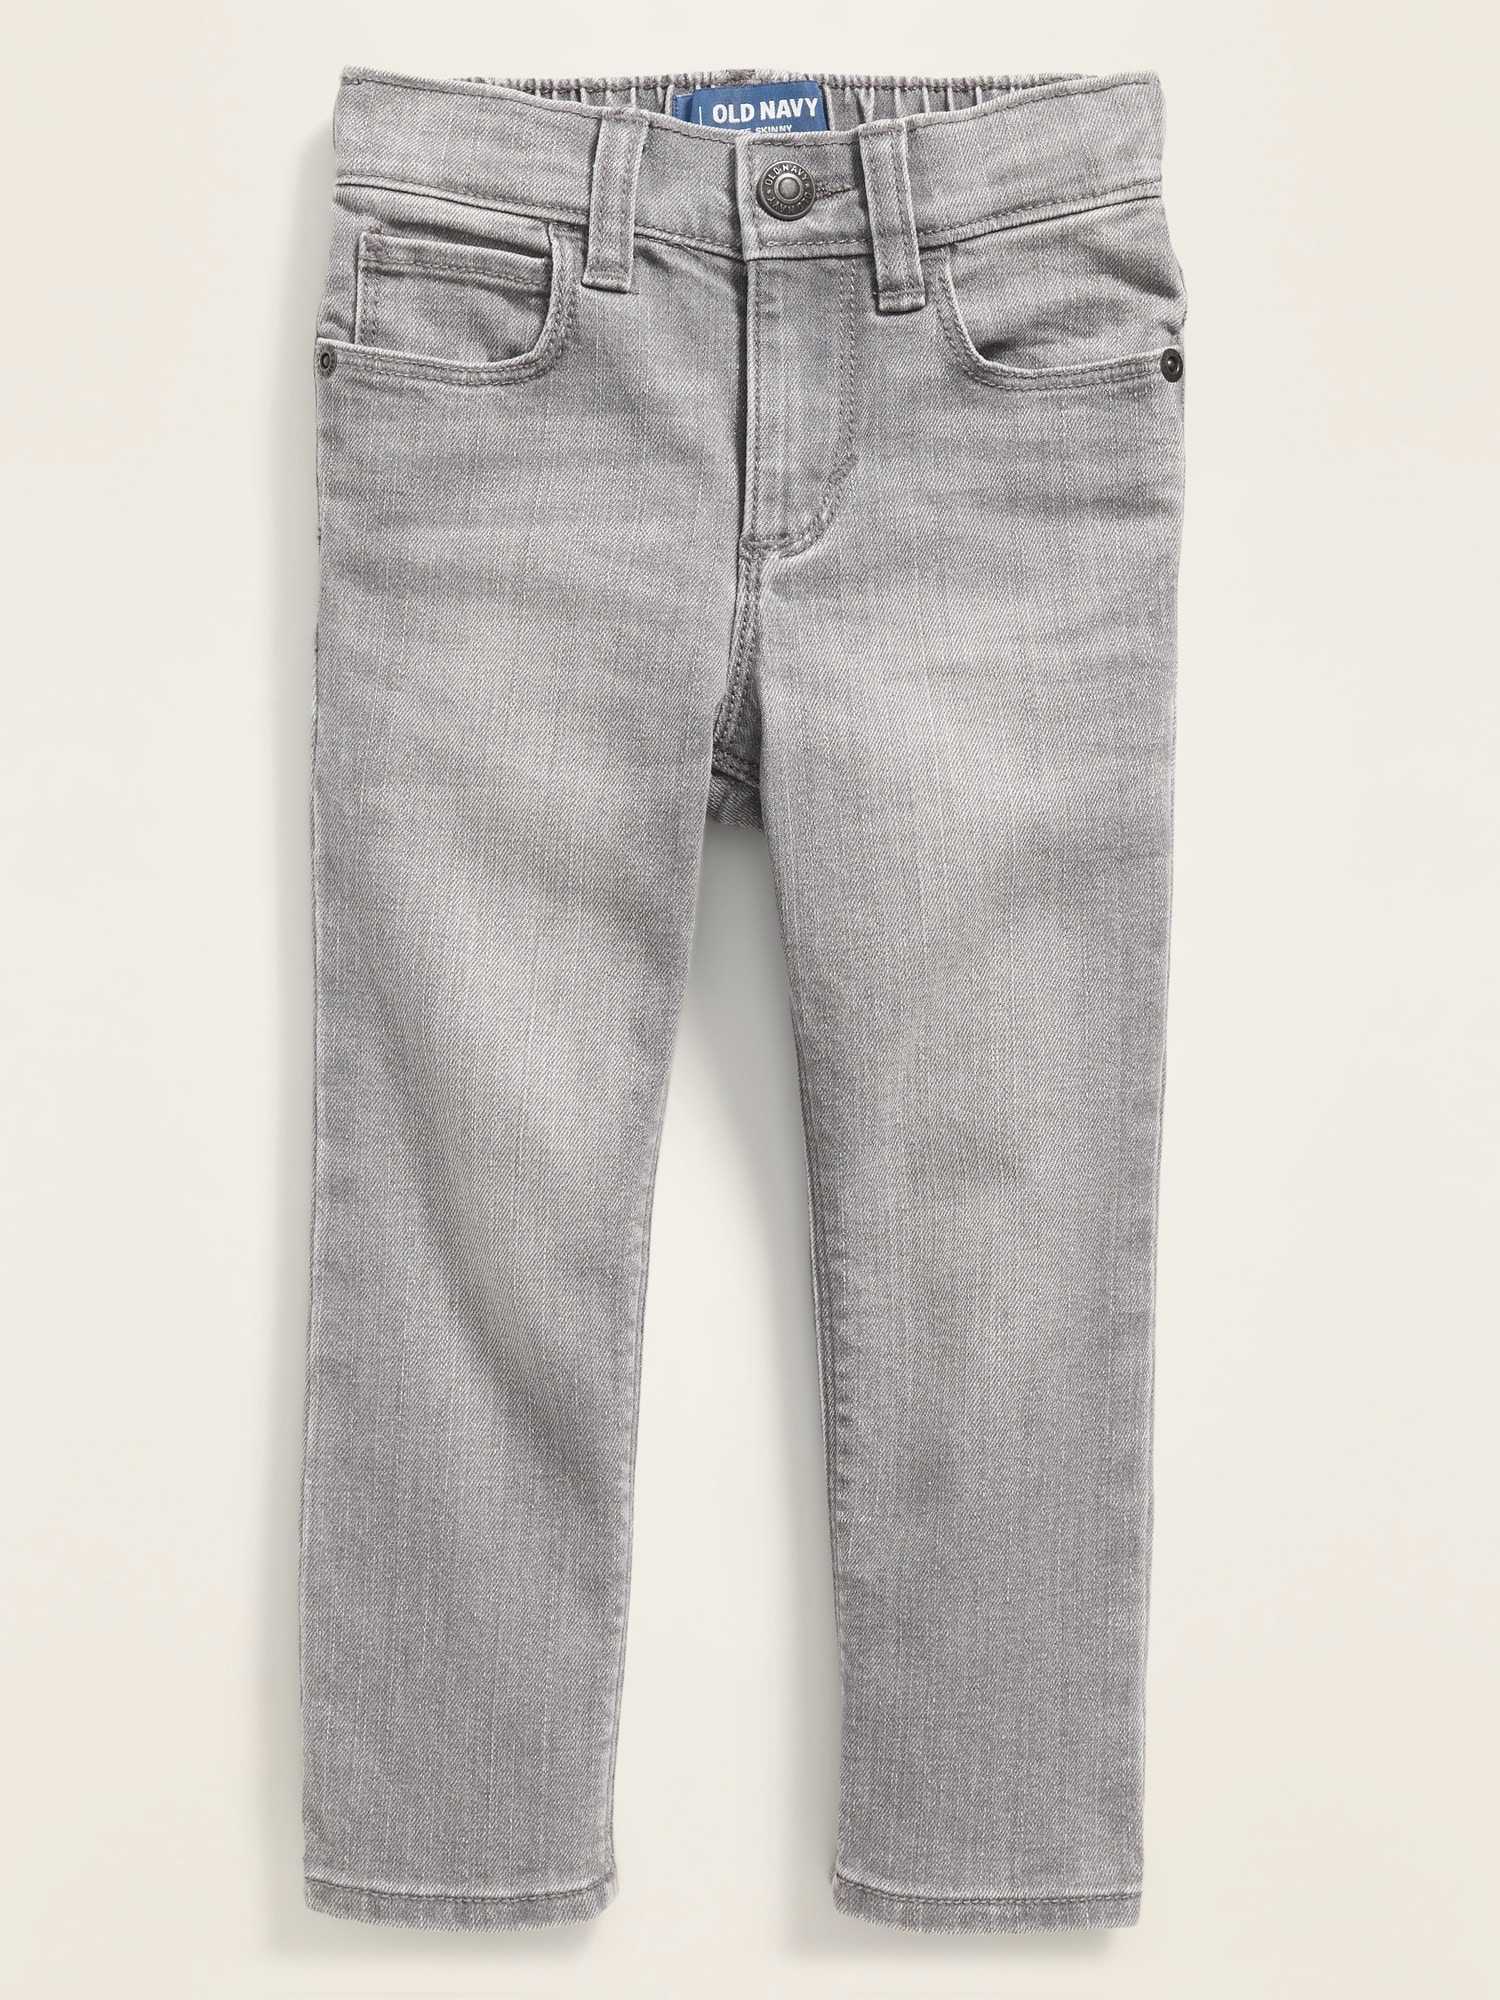 comfortable jeans for boys